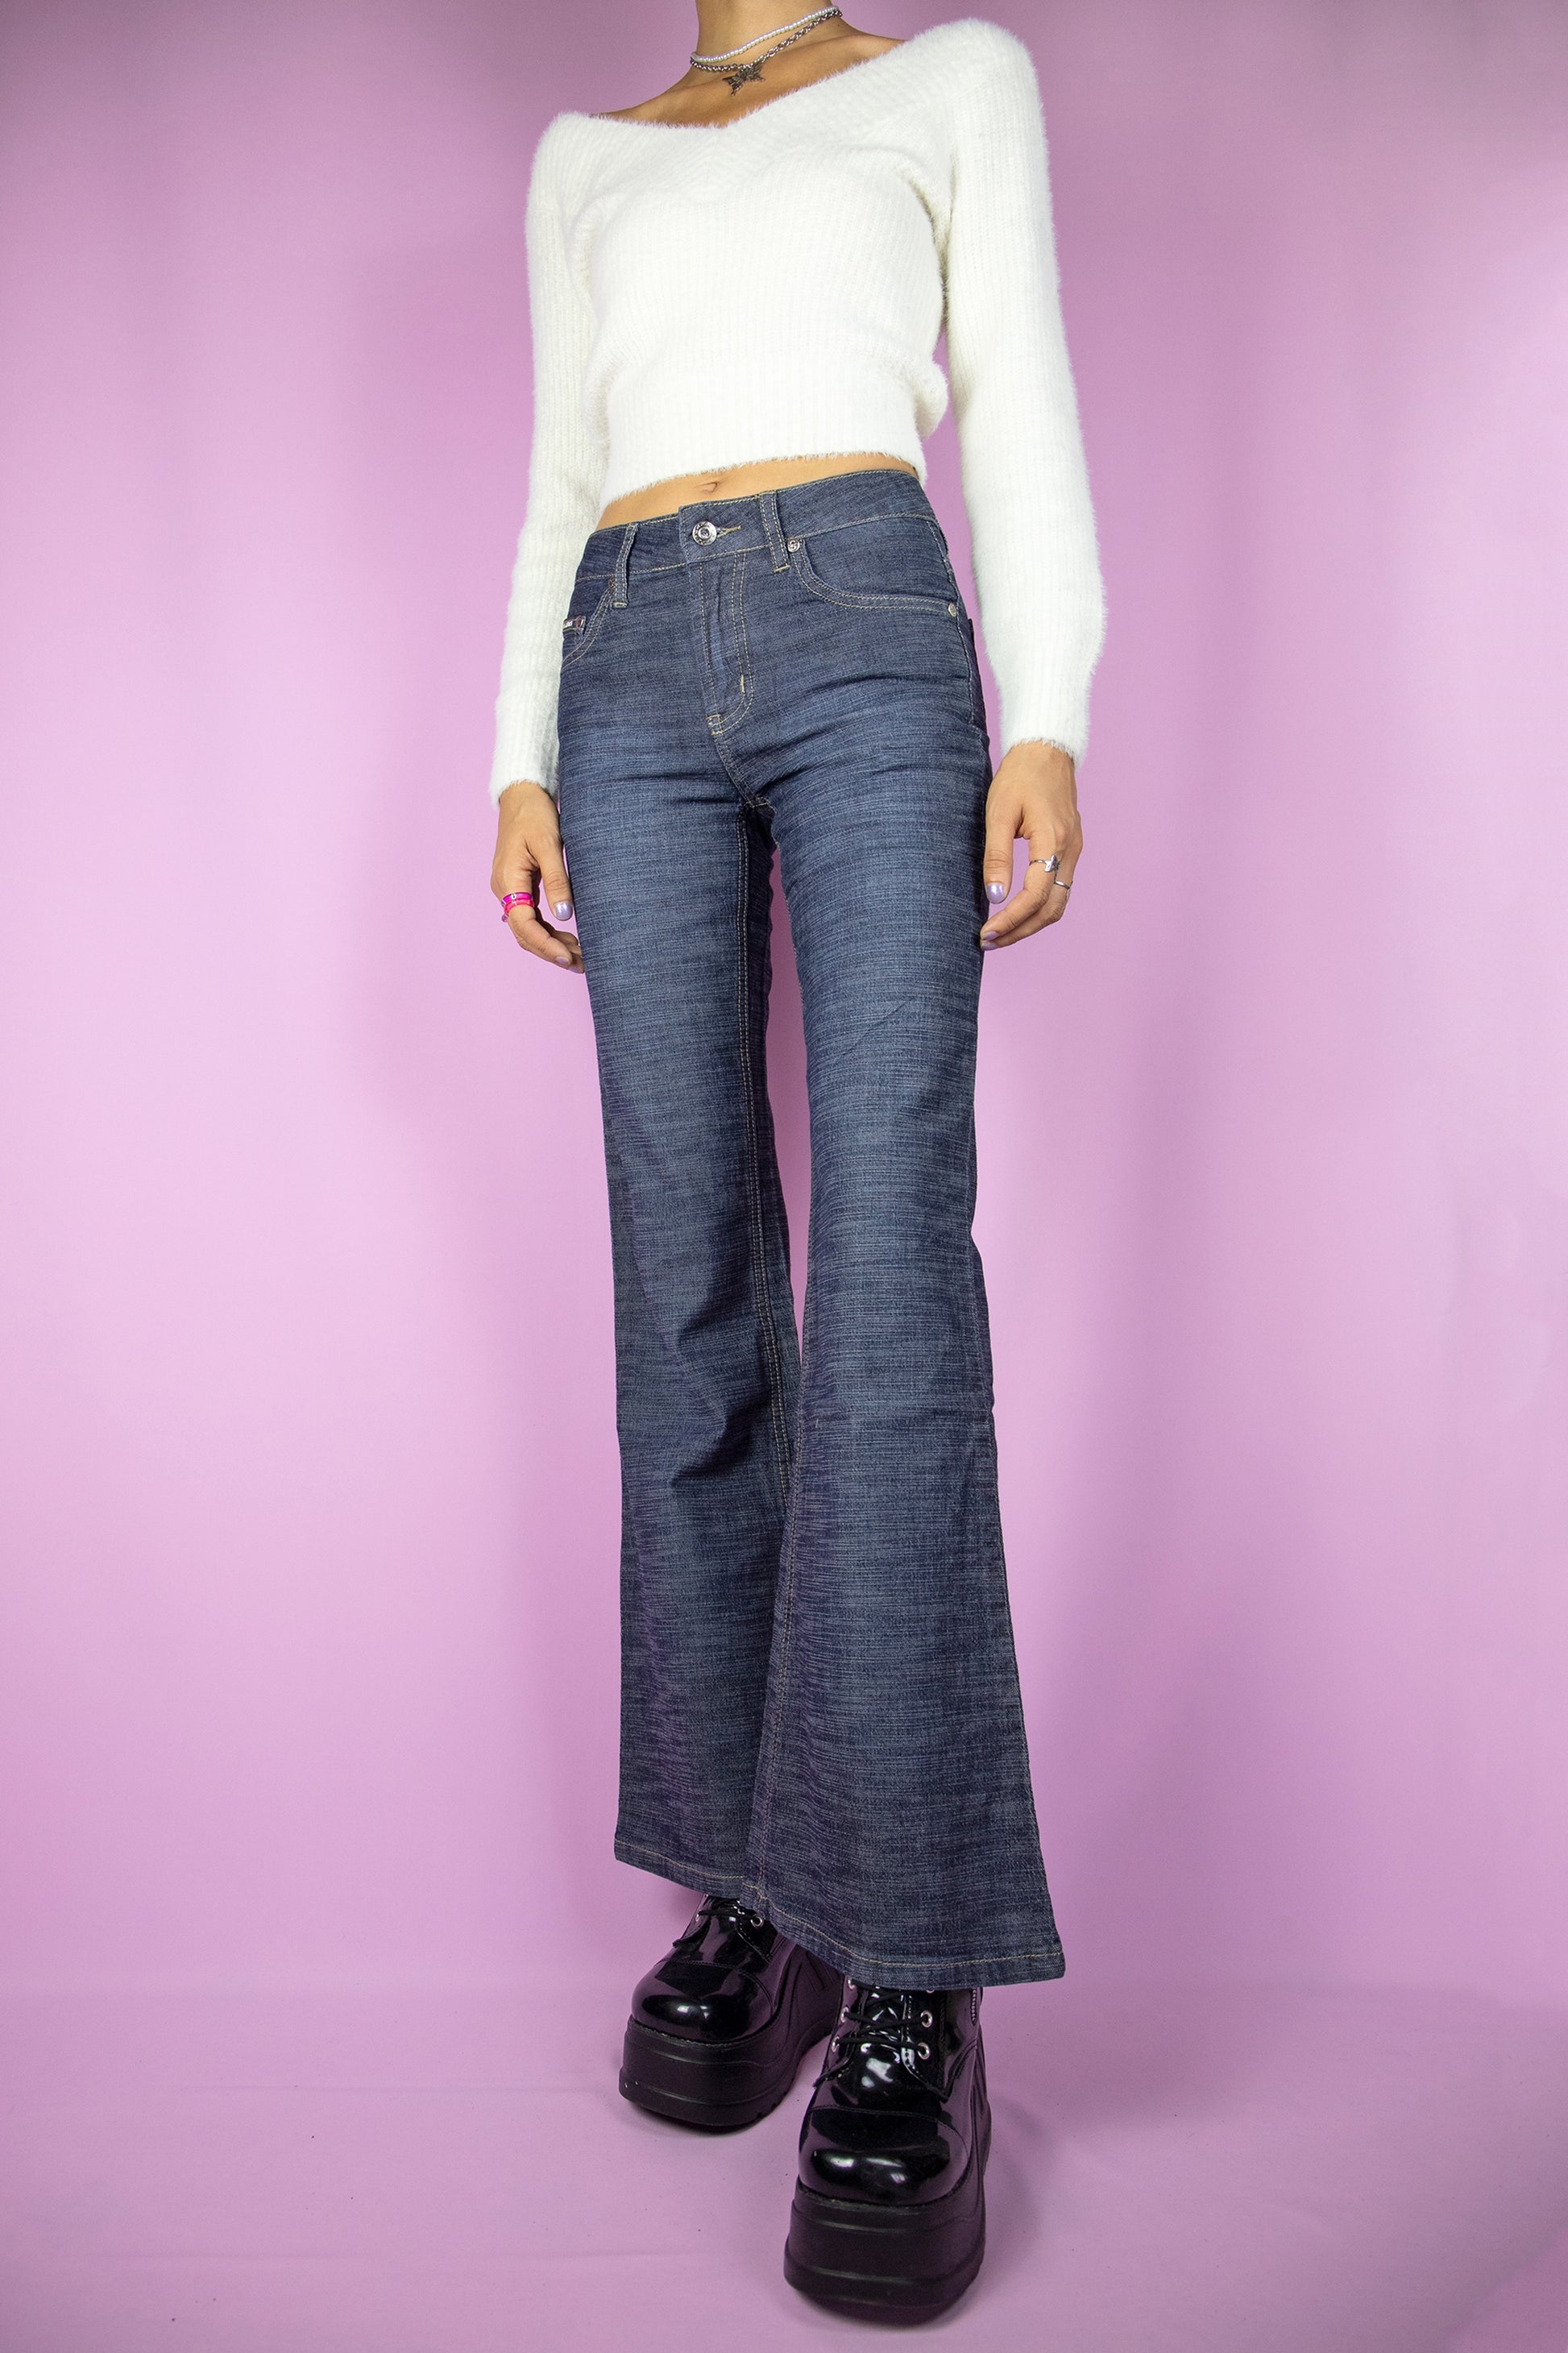 The Y2K Dark Denim Flare Jeans are vintage wide pants with pockets. Cyber grunge 2000s jeans.